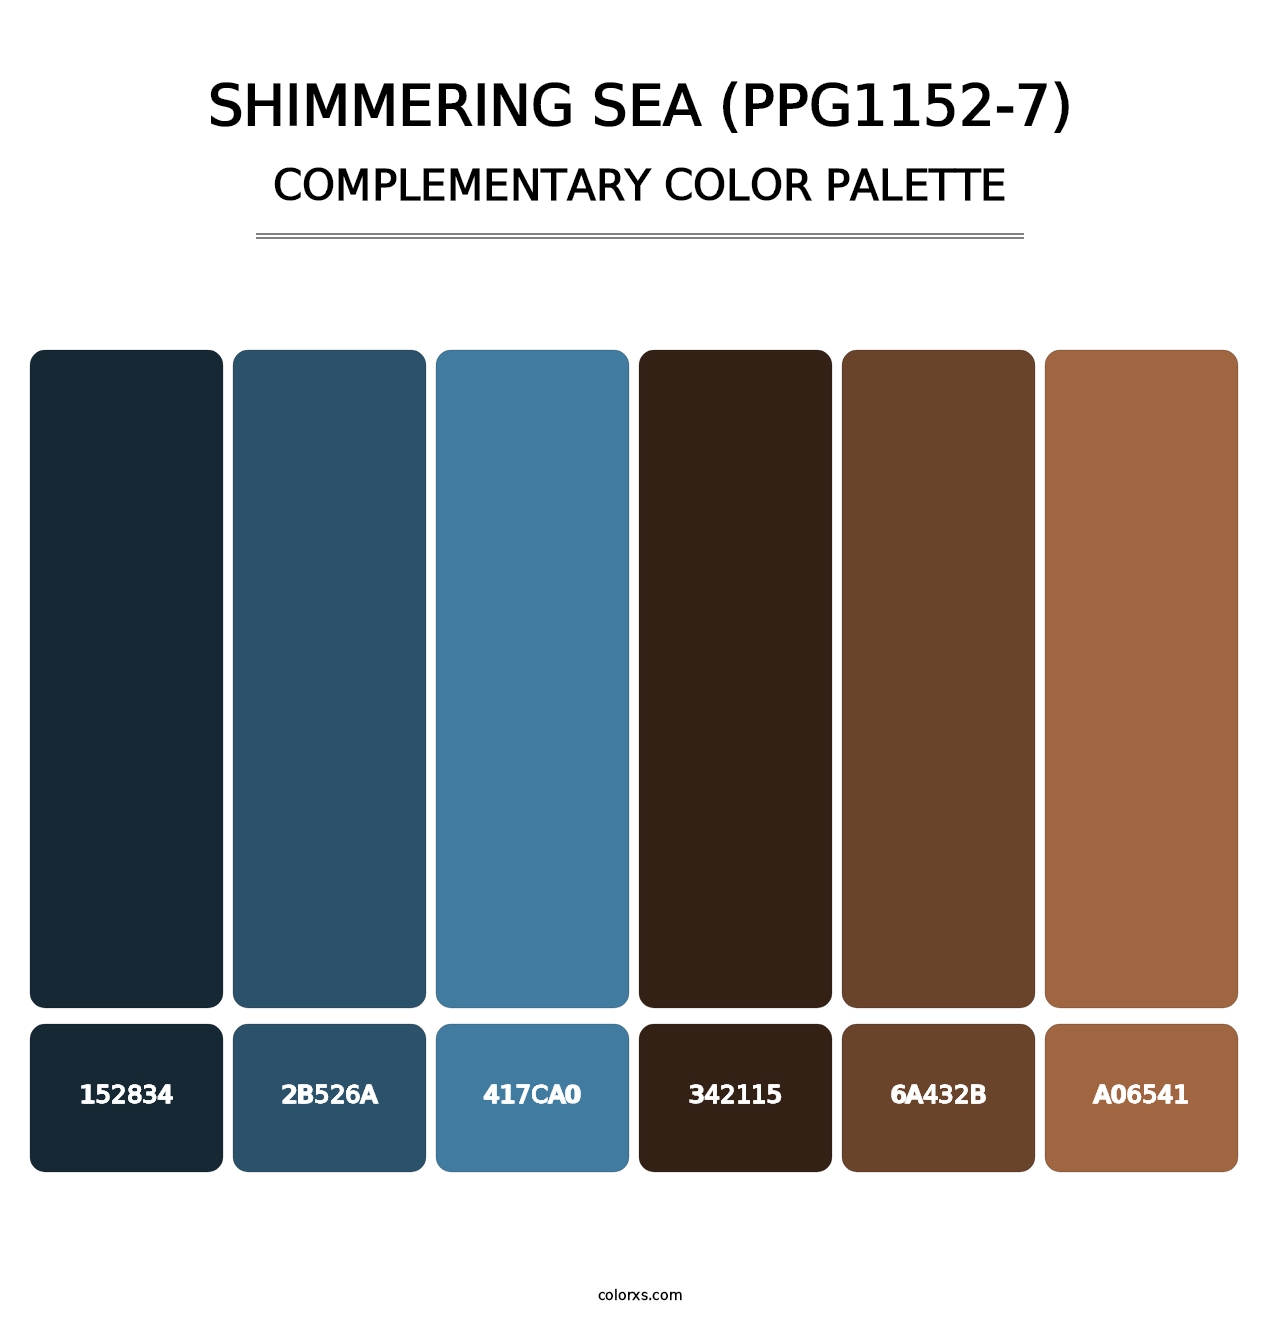 Shimmering Sea (PPG1152-7) - Complementary Color Palette